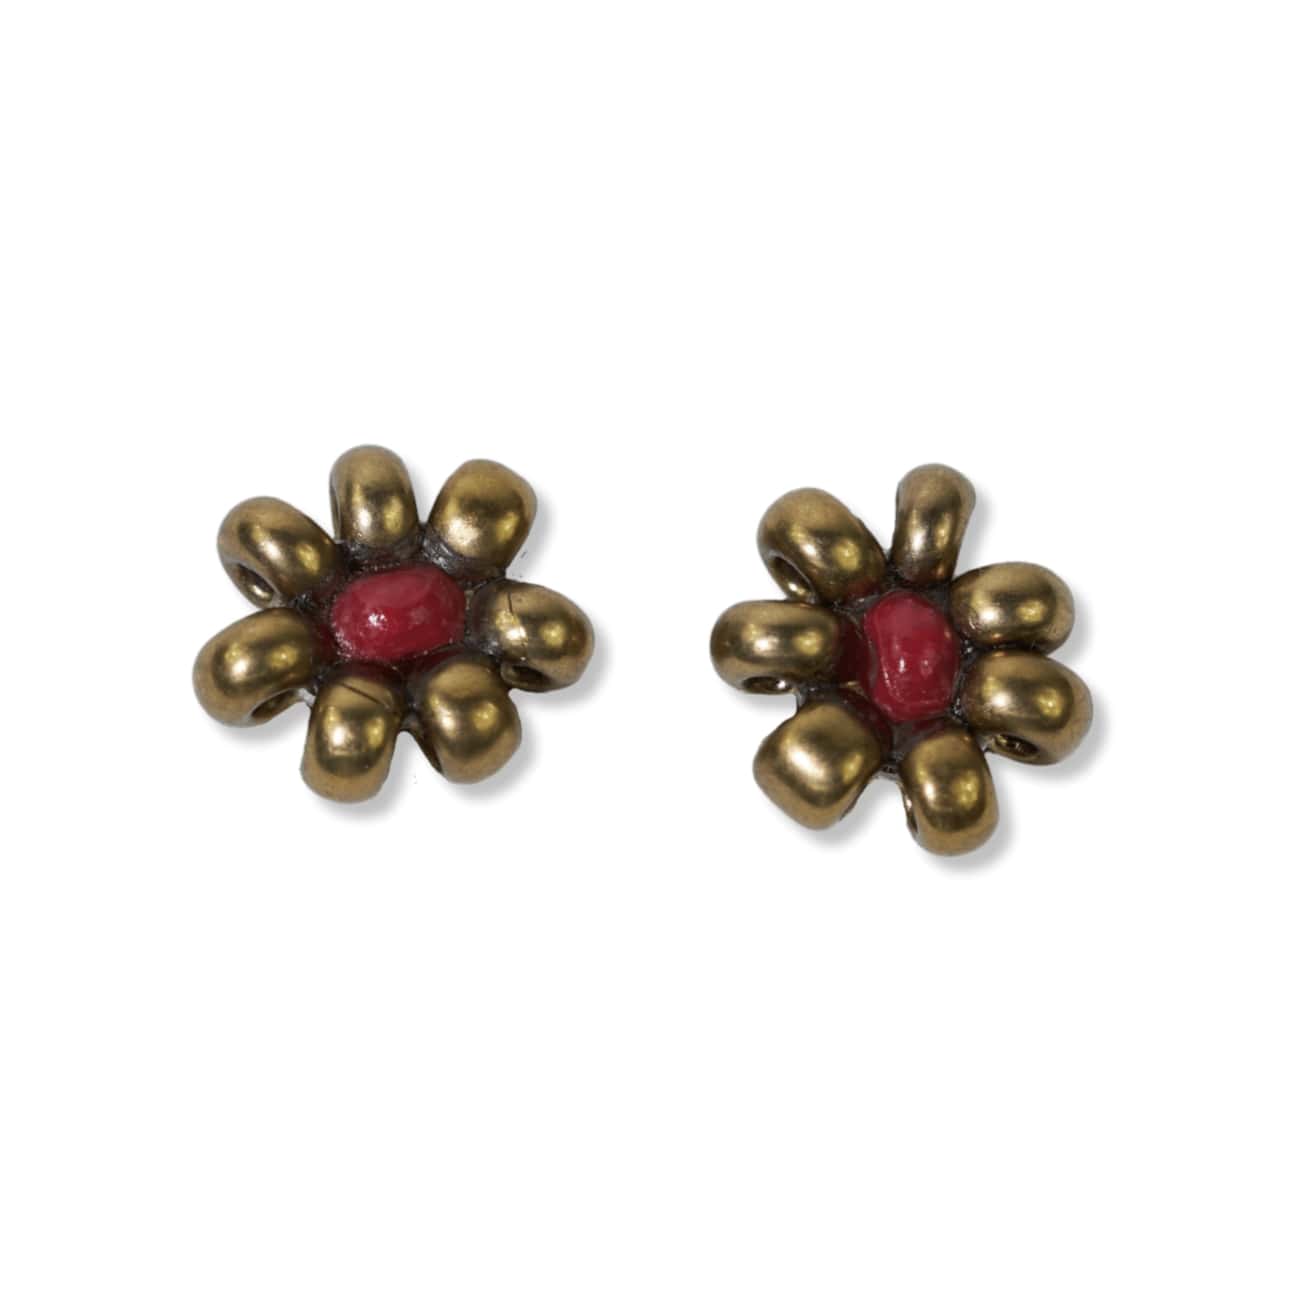 Tina two color beaded post earrings gold + dark red